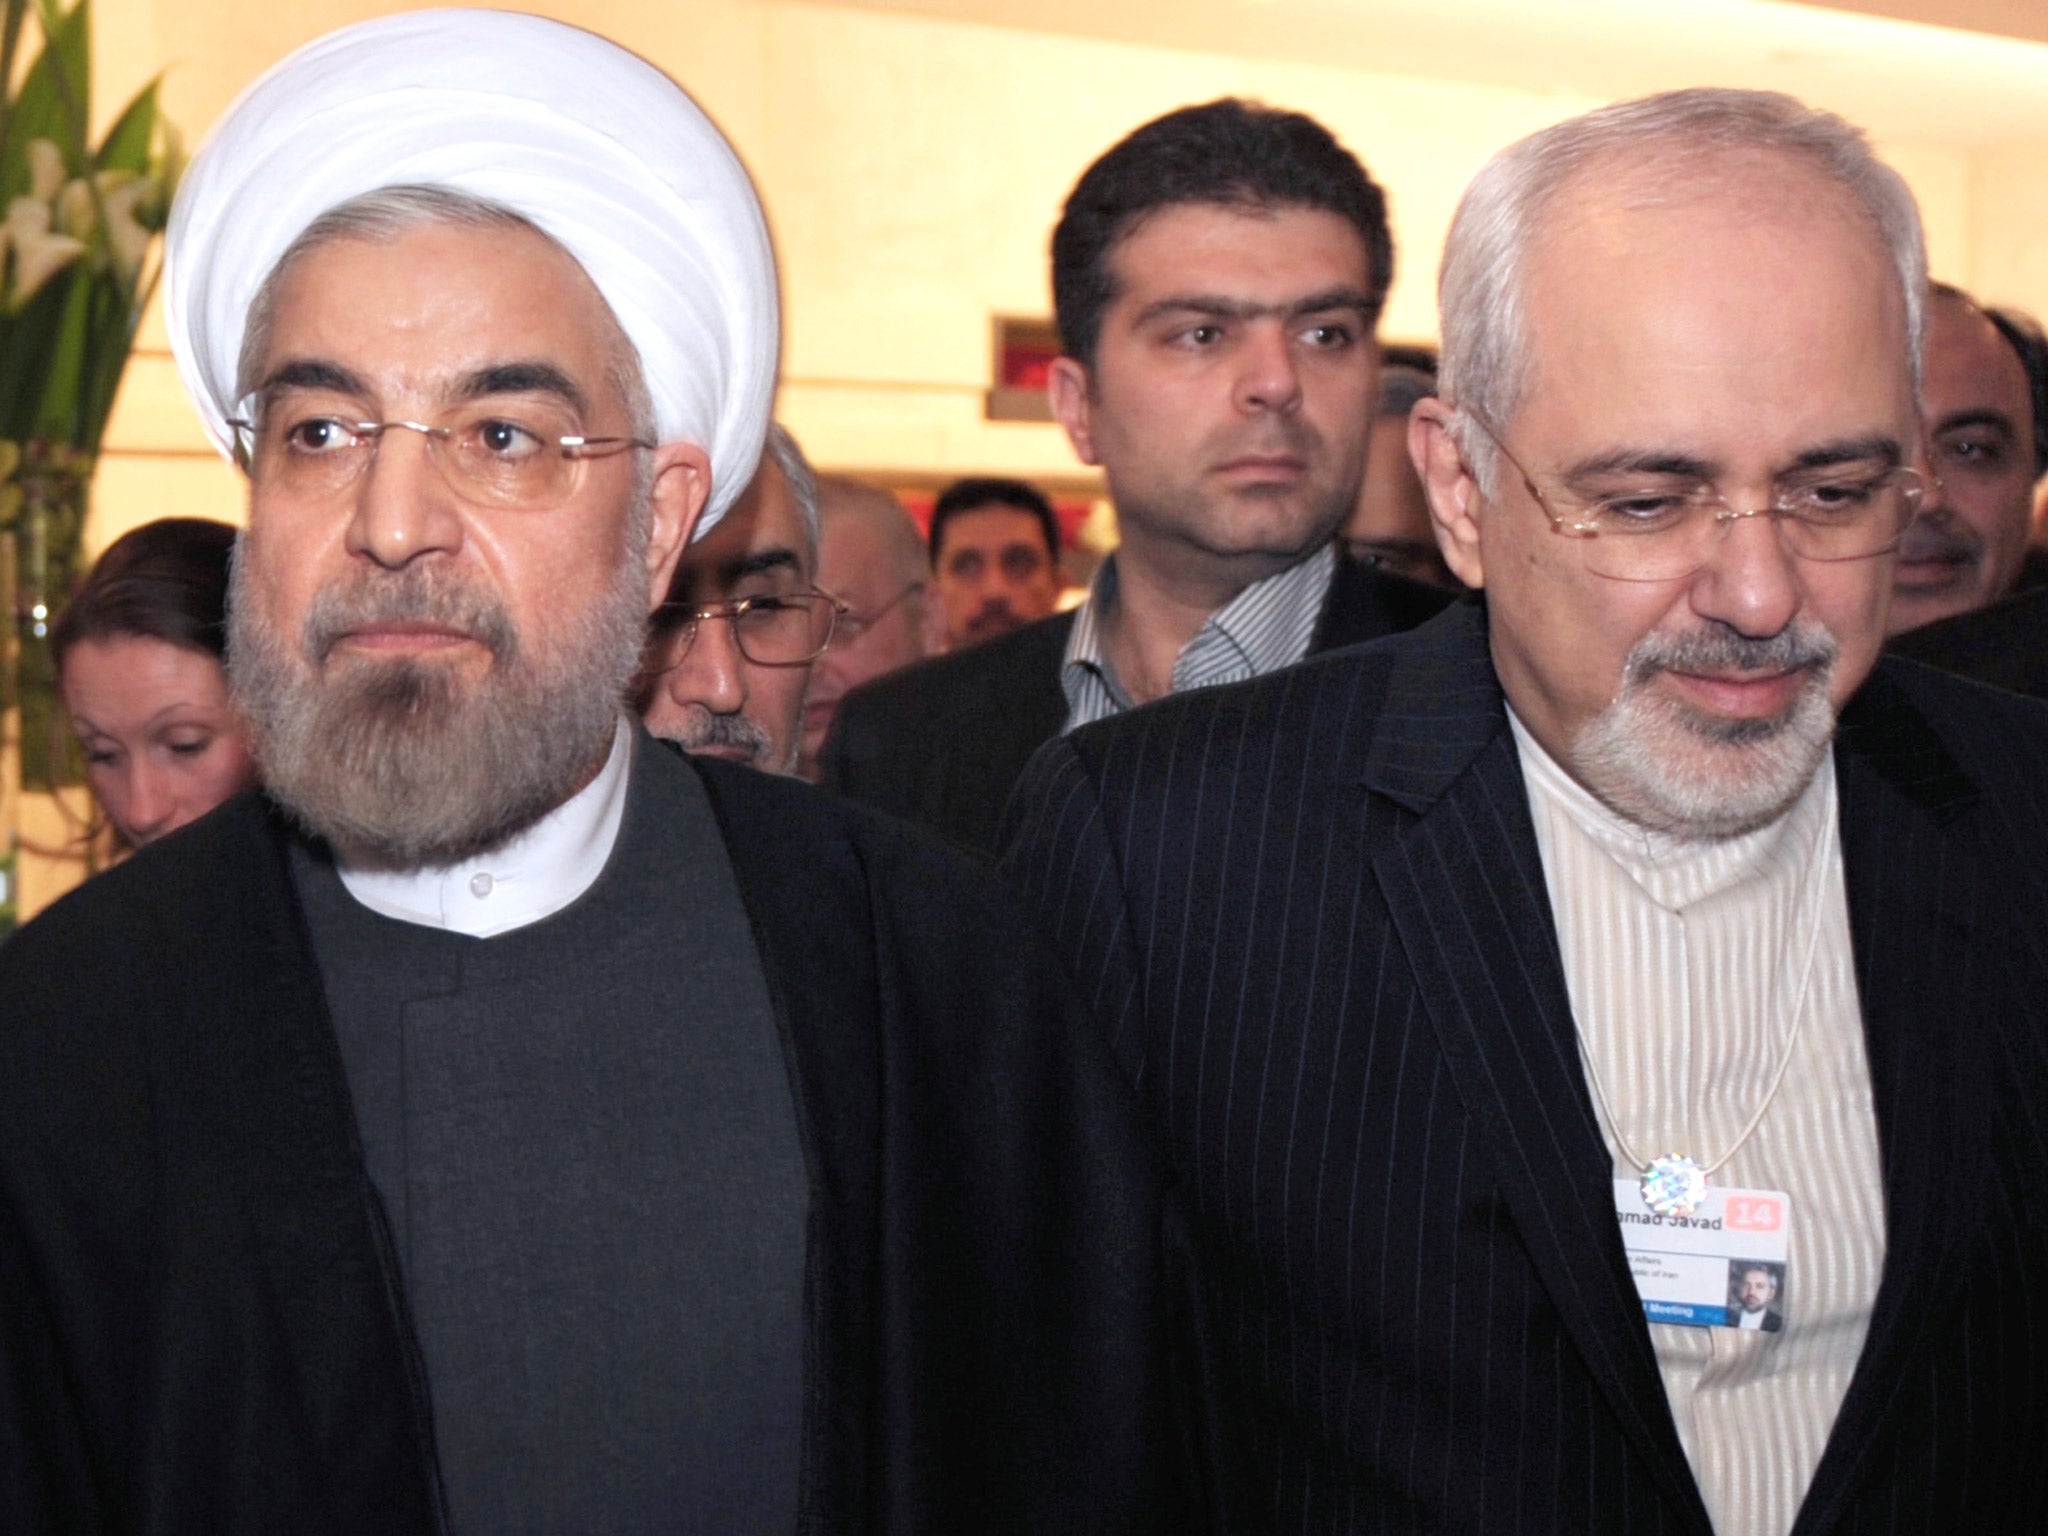 Iran’s President, Hassan Rouhani, and Foreign Minister, Mohammad Javad Zarif